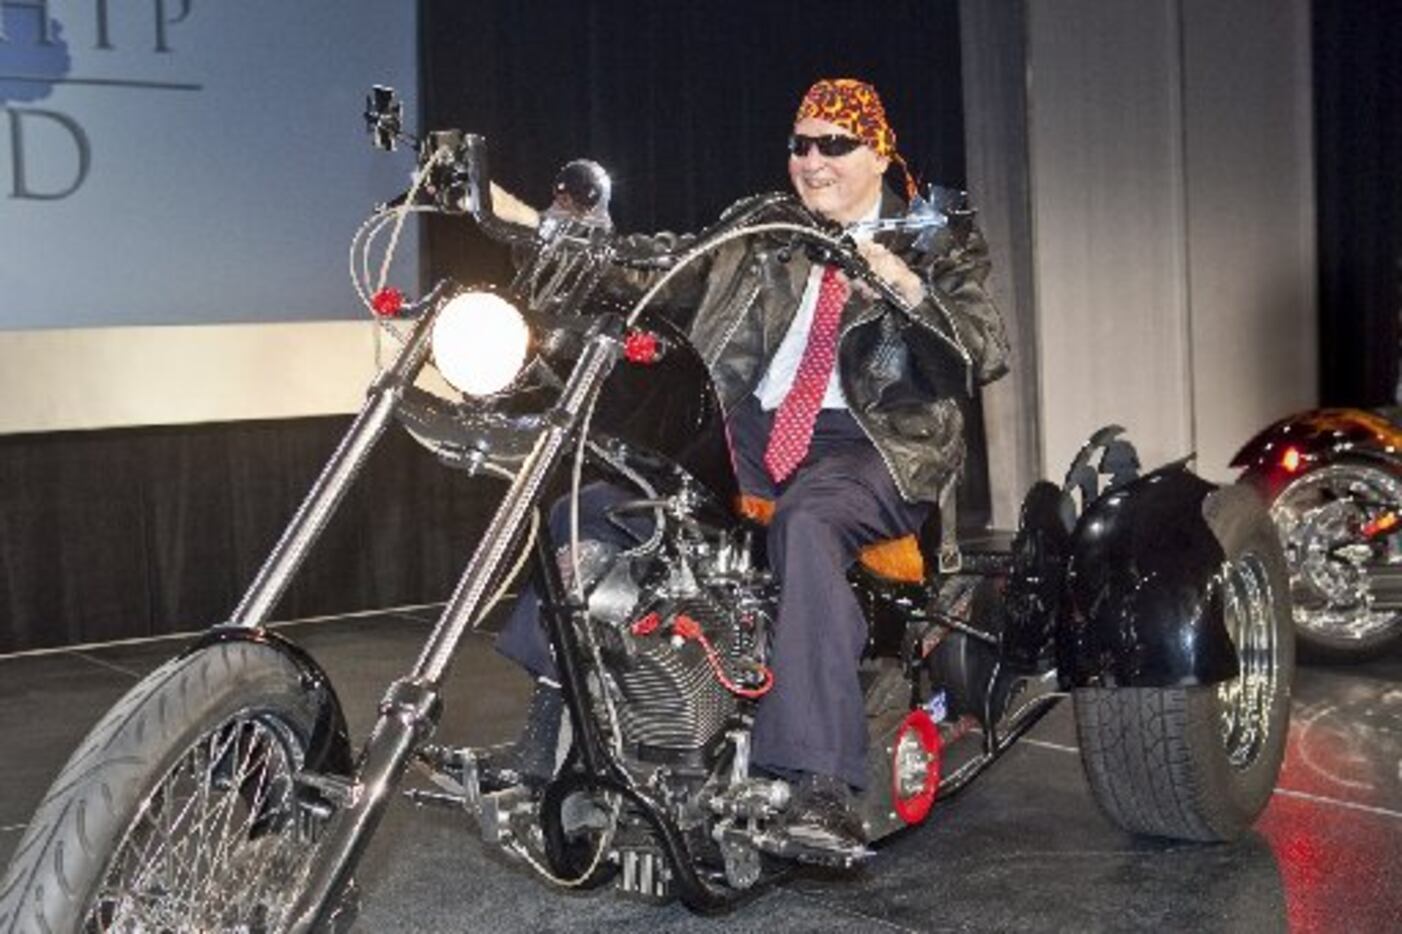 Restaurant legend Norman Brinker rode one of Strokers choppers in May 2009 for a Methodist...